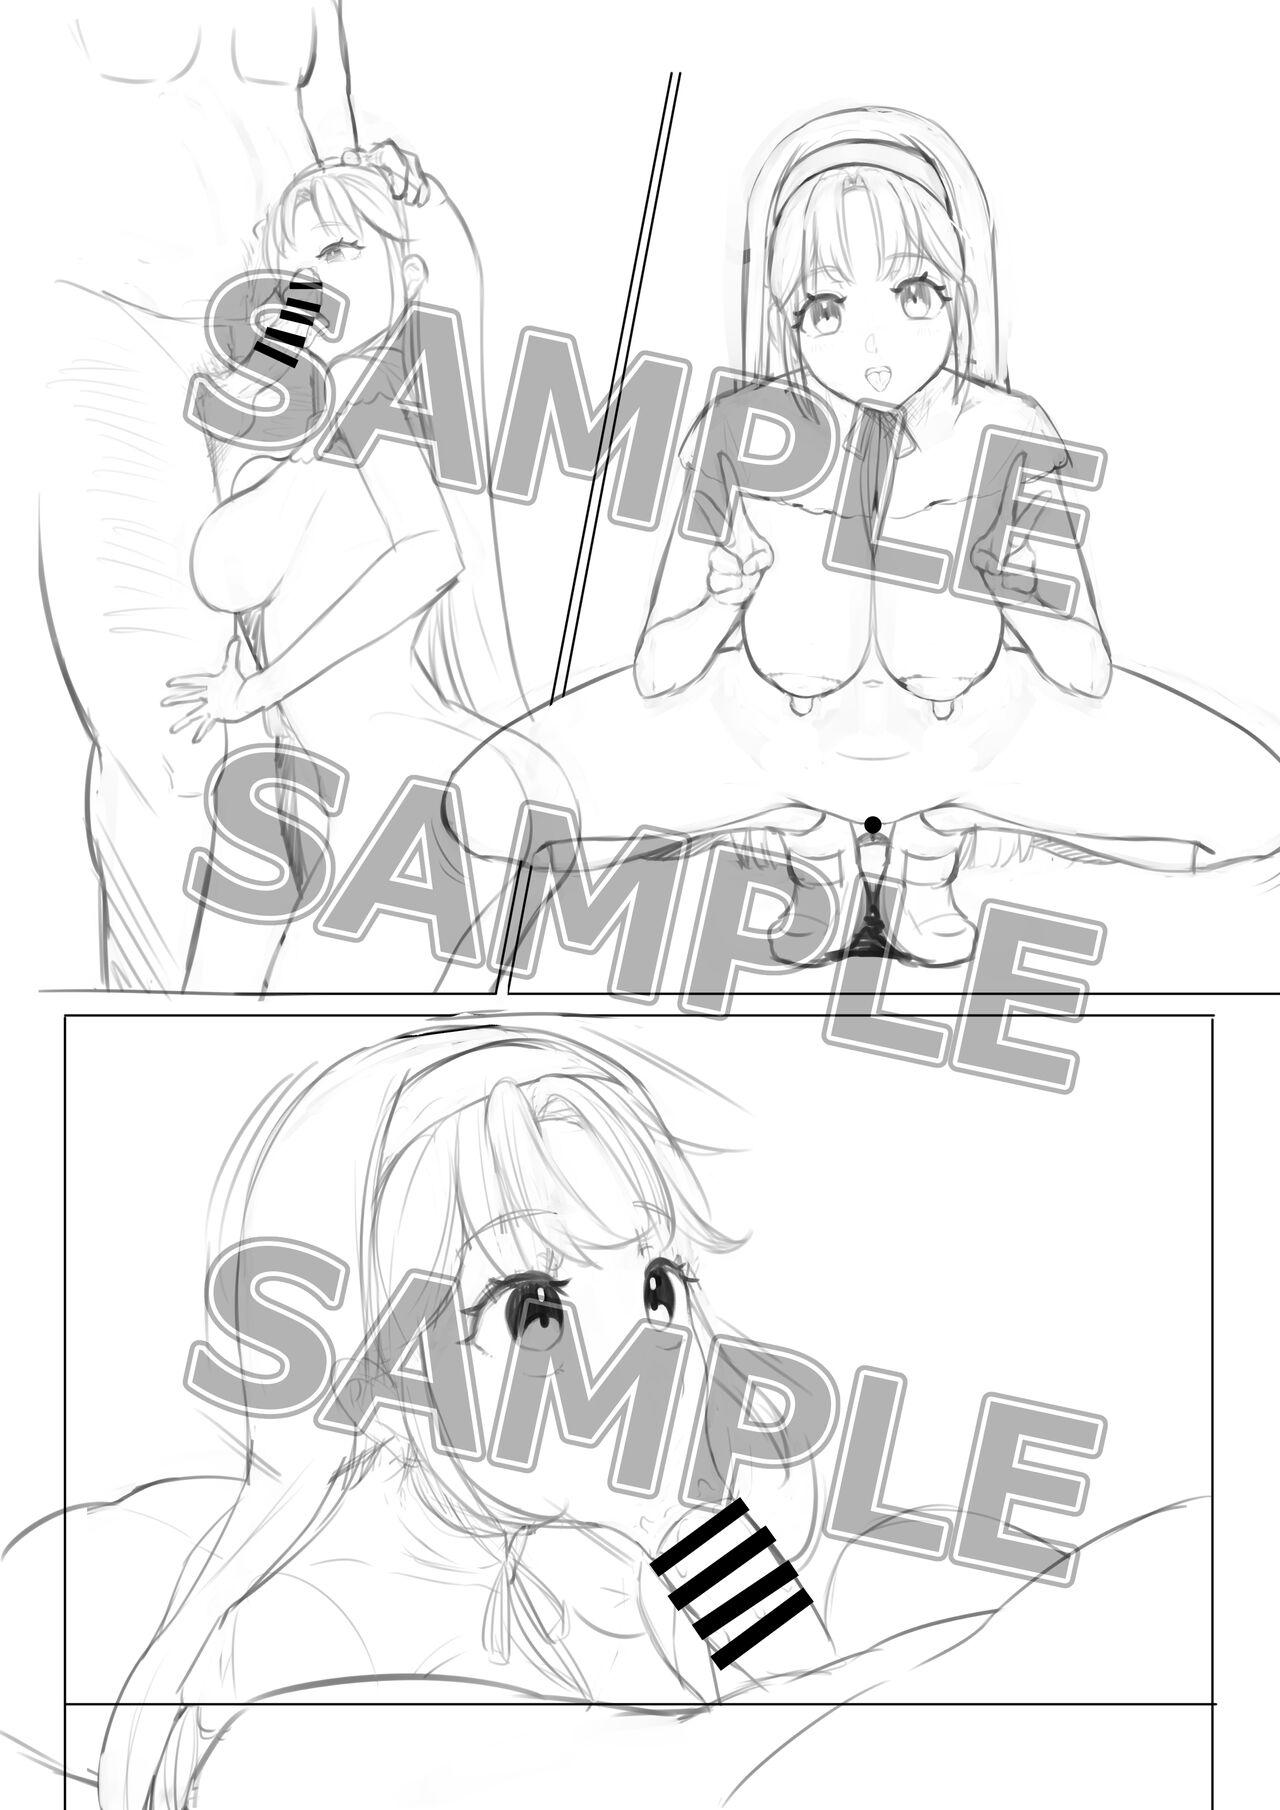 Francais Unfinished/In progress works - Nijisanji Funny - Page 21